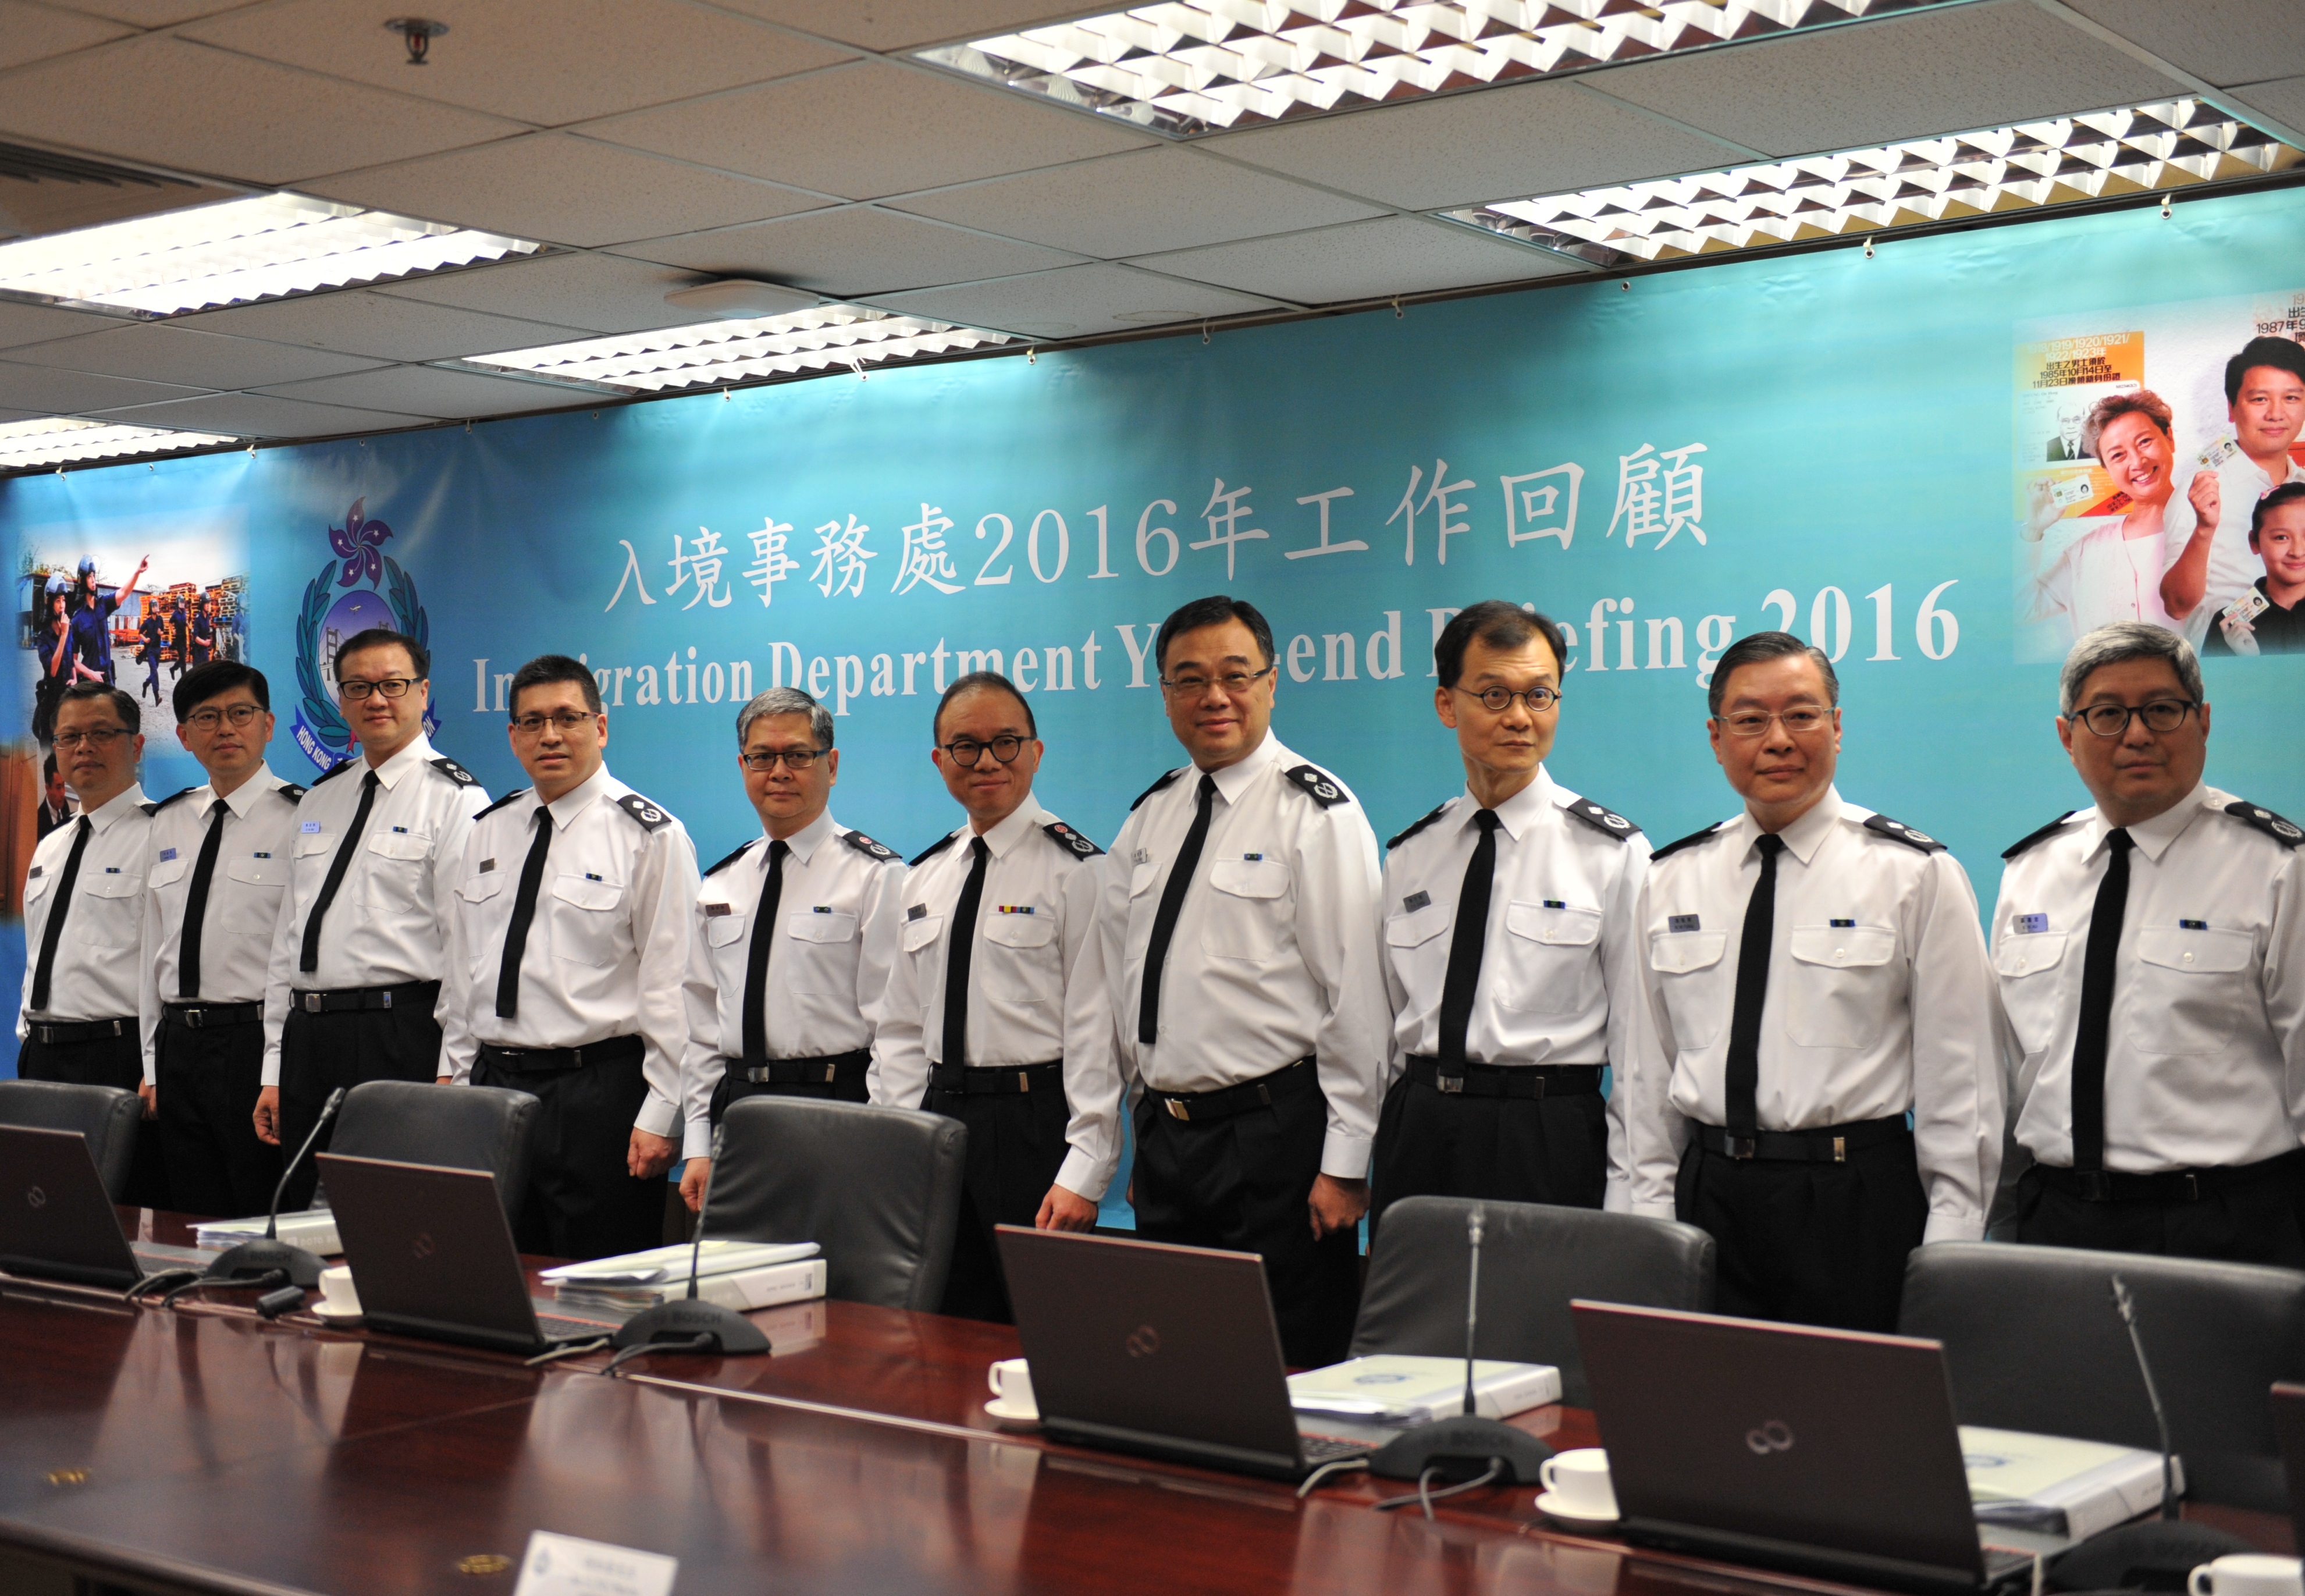 The Director of Immigration, Mr Tsang Kwok-wai (fifth right), chairs the press conference of the Immigration Department's year-end review of 2016 today (January 26).